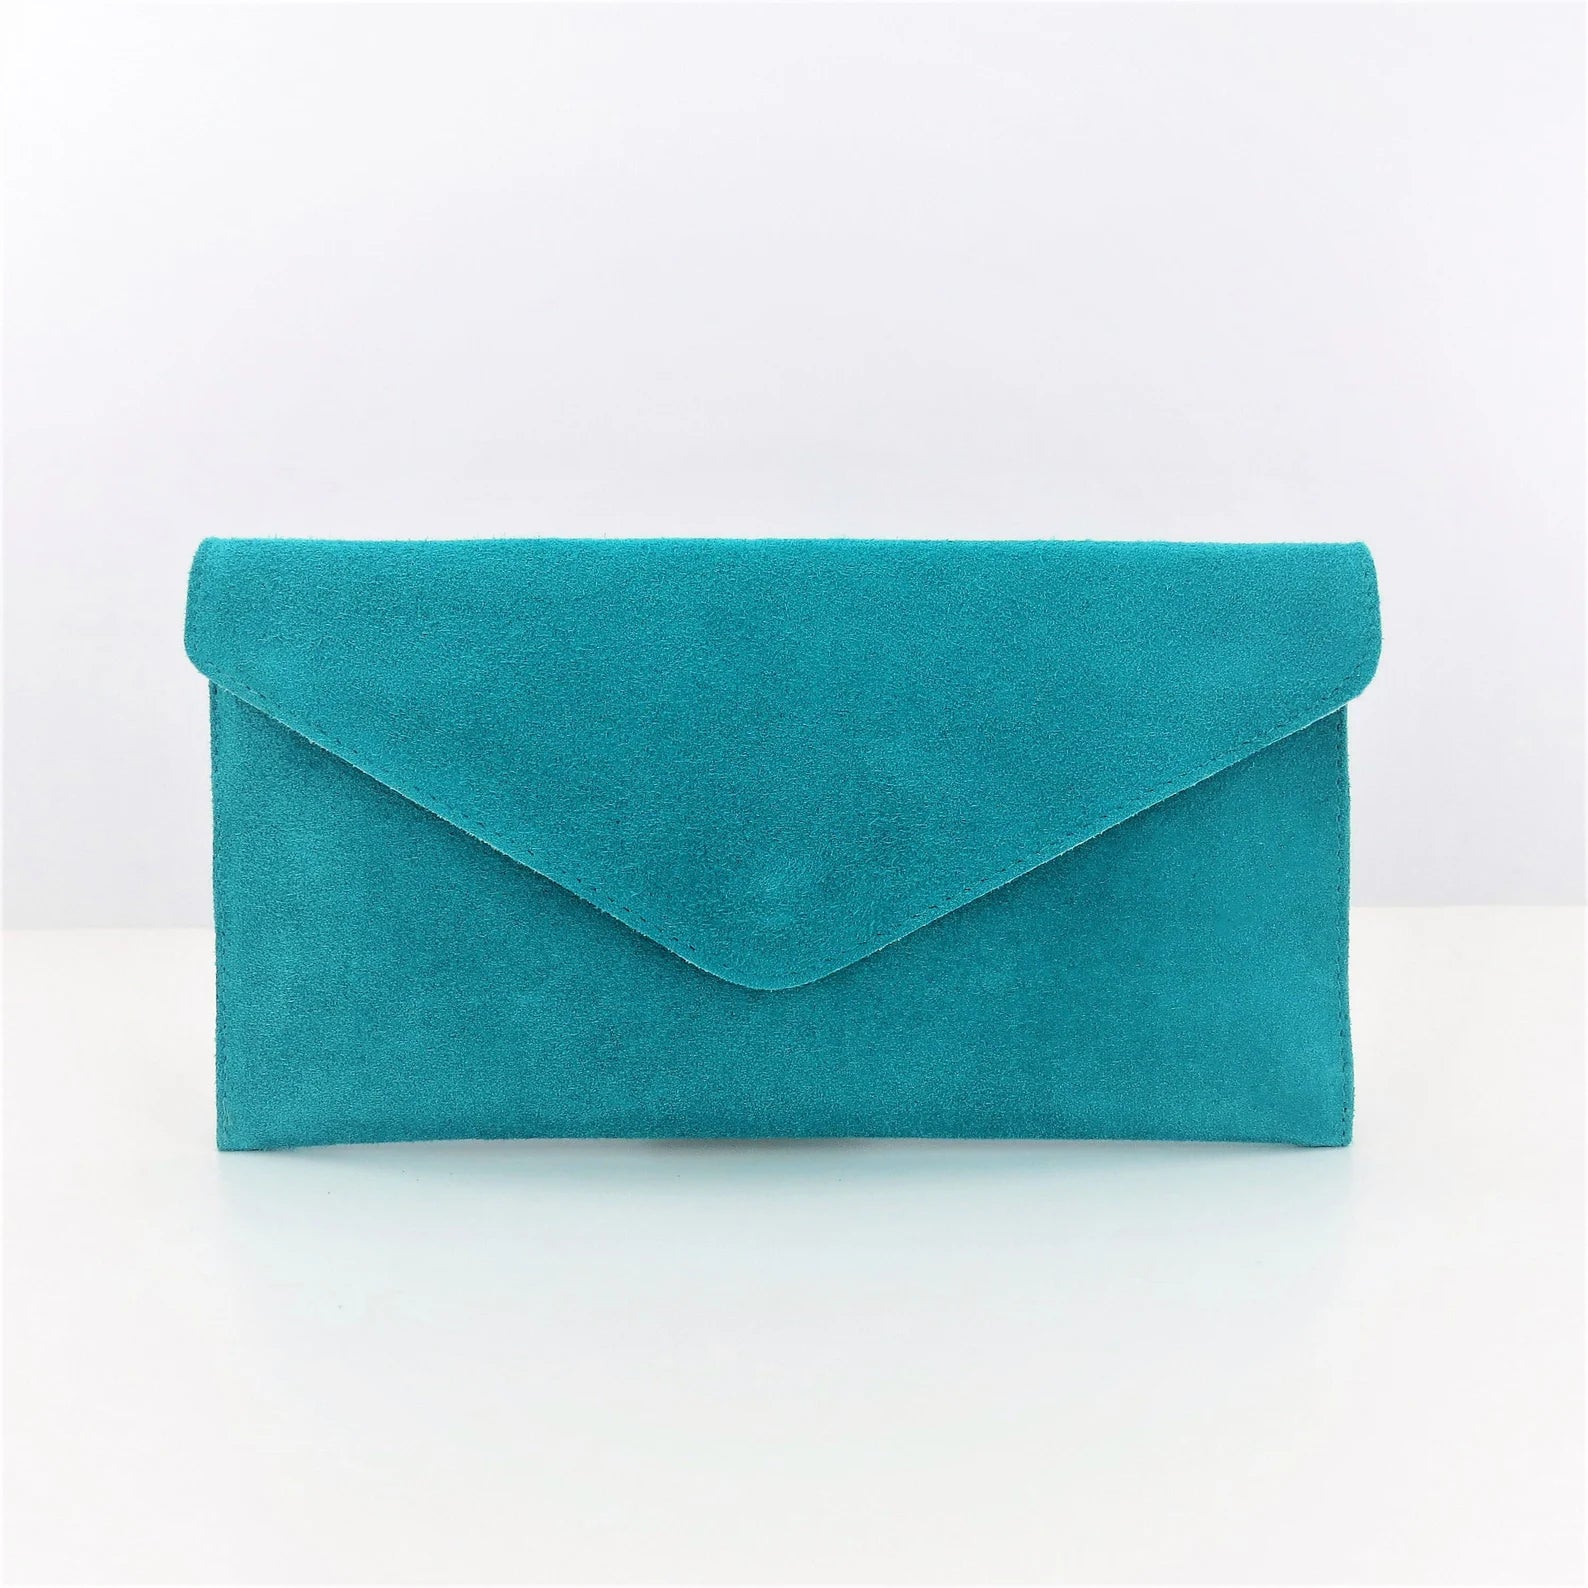 Turquoise Envelope Clutch Bag front